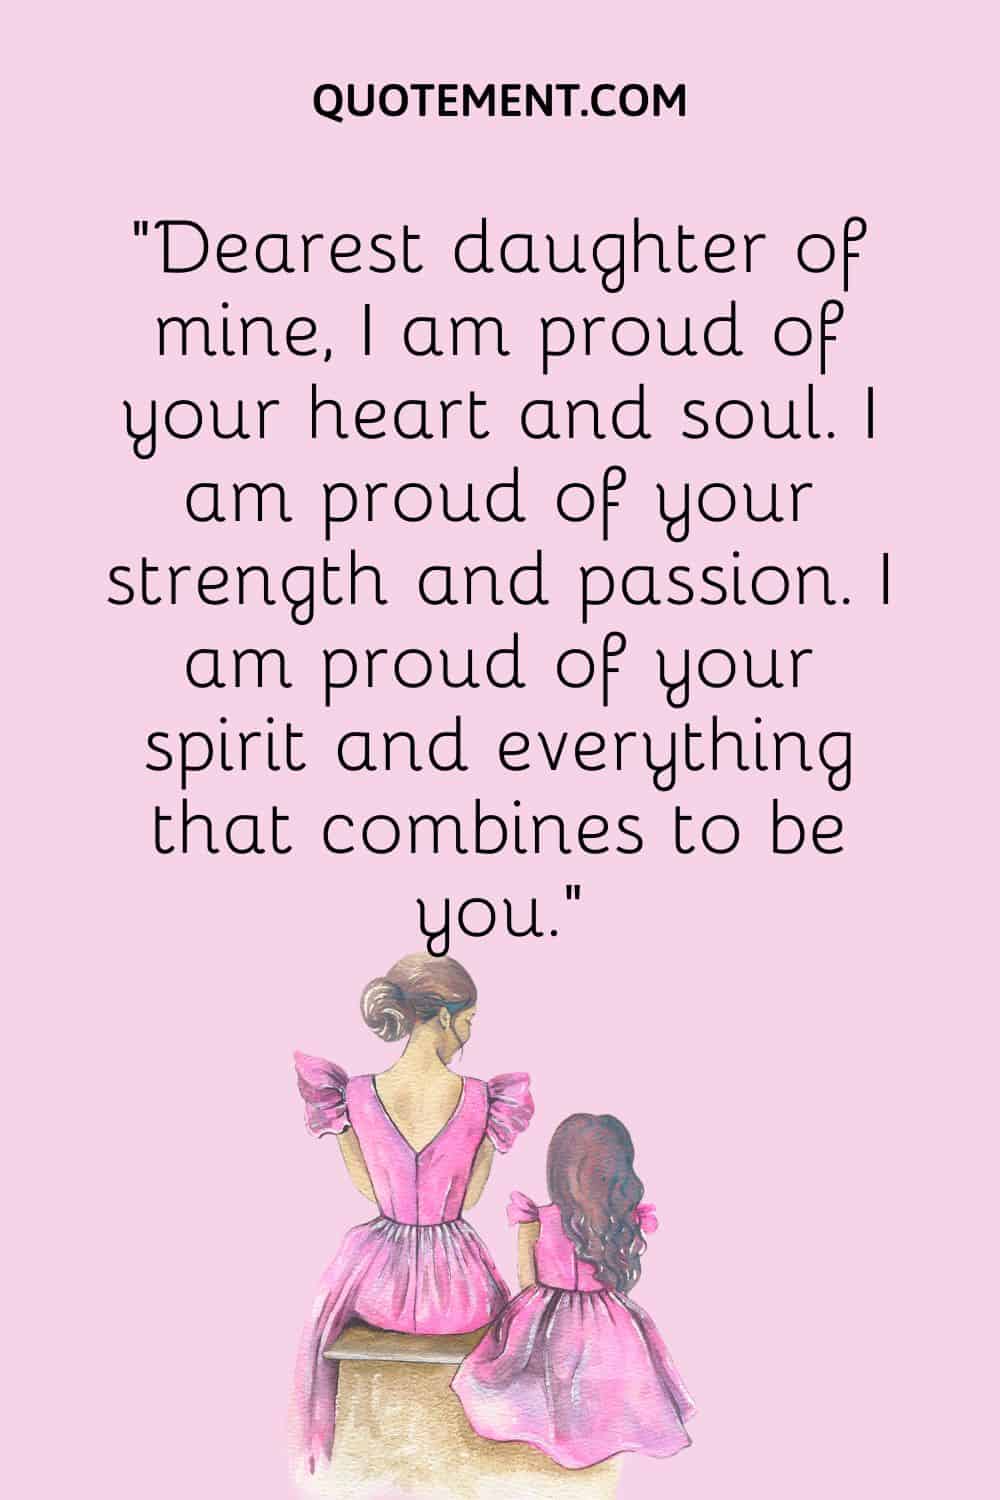 “Dearest daughter of mine, I am proud of your heart and soul. I am proud of your strength and passion. I am proud of your spirit and everything that combines to be you.”